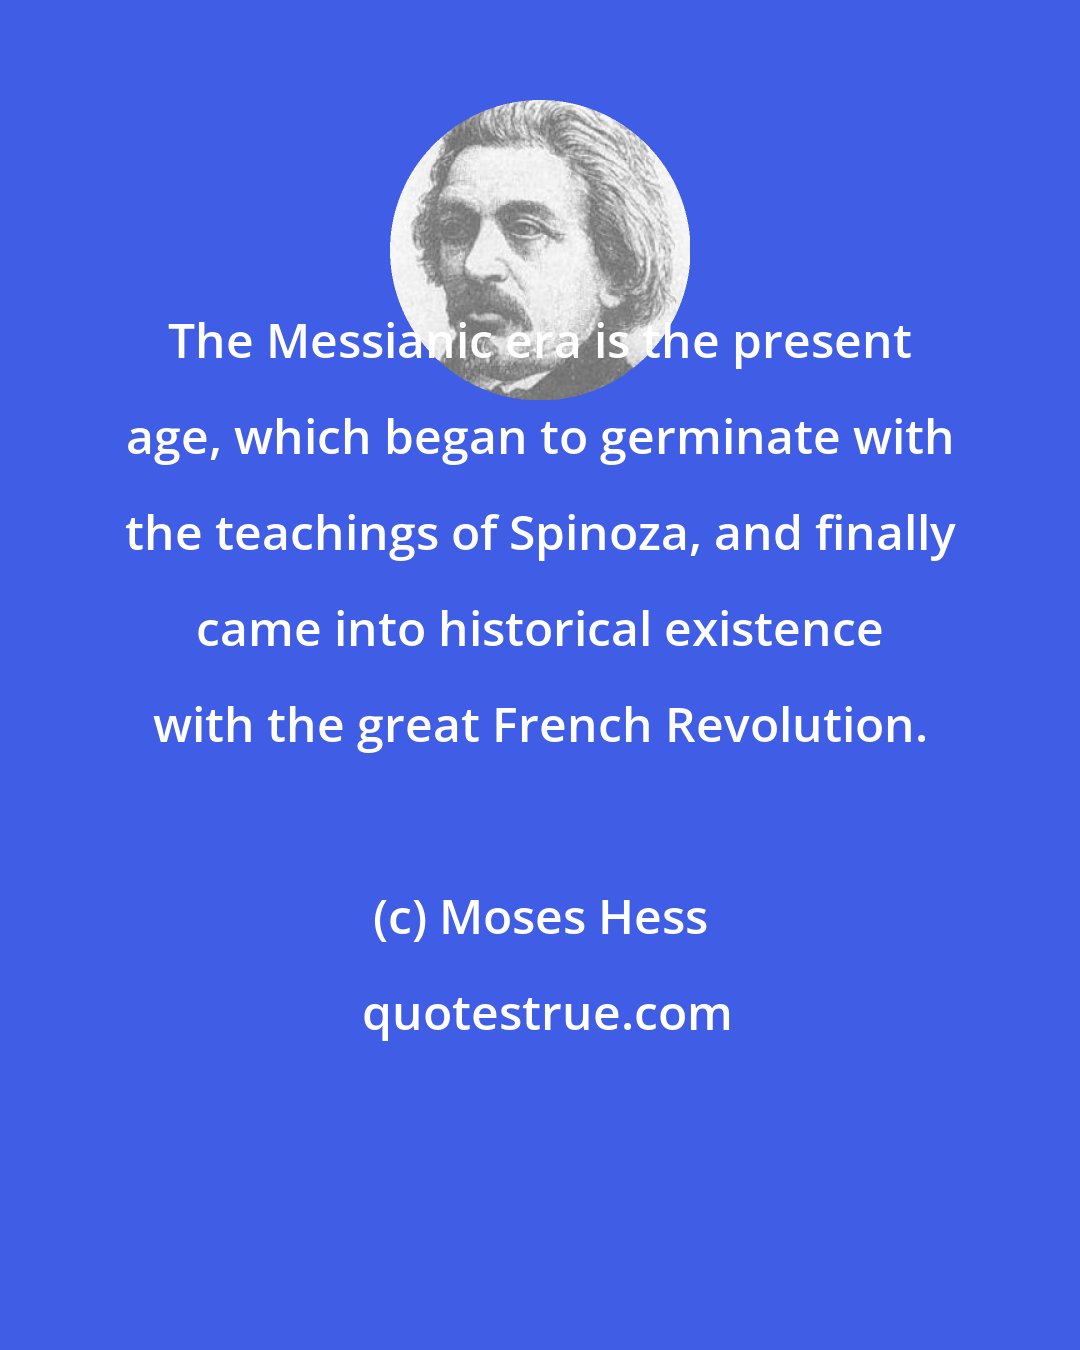 Moses Hess: The Messianic era is the present age, which began to germinate with the teachings of Spinoza, and finally came into historical existence with the great French Revolution.